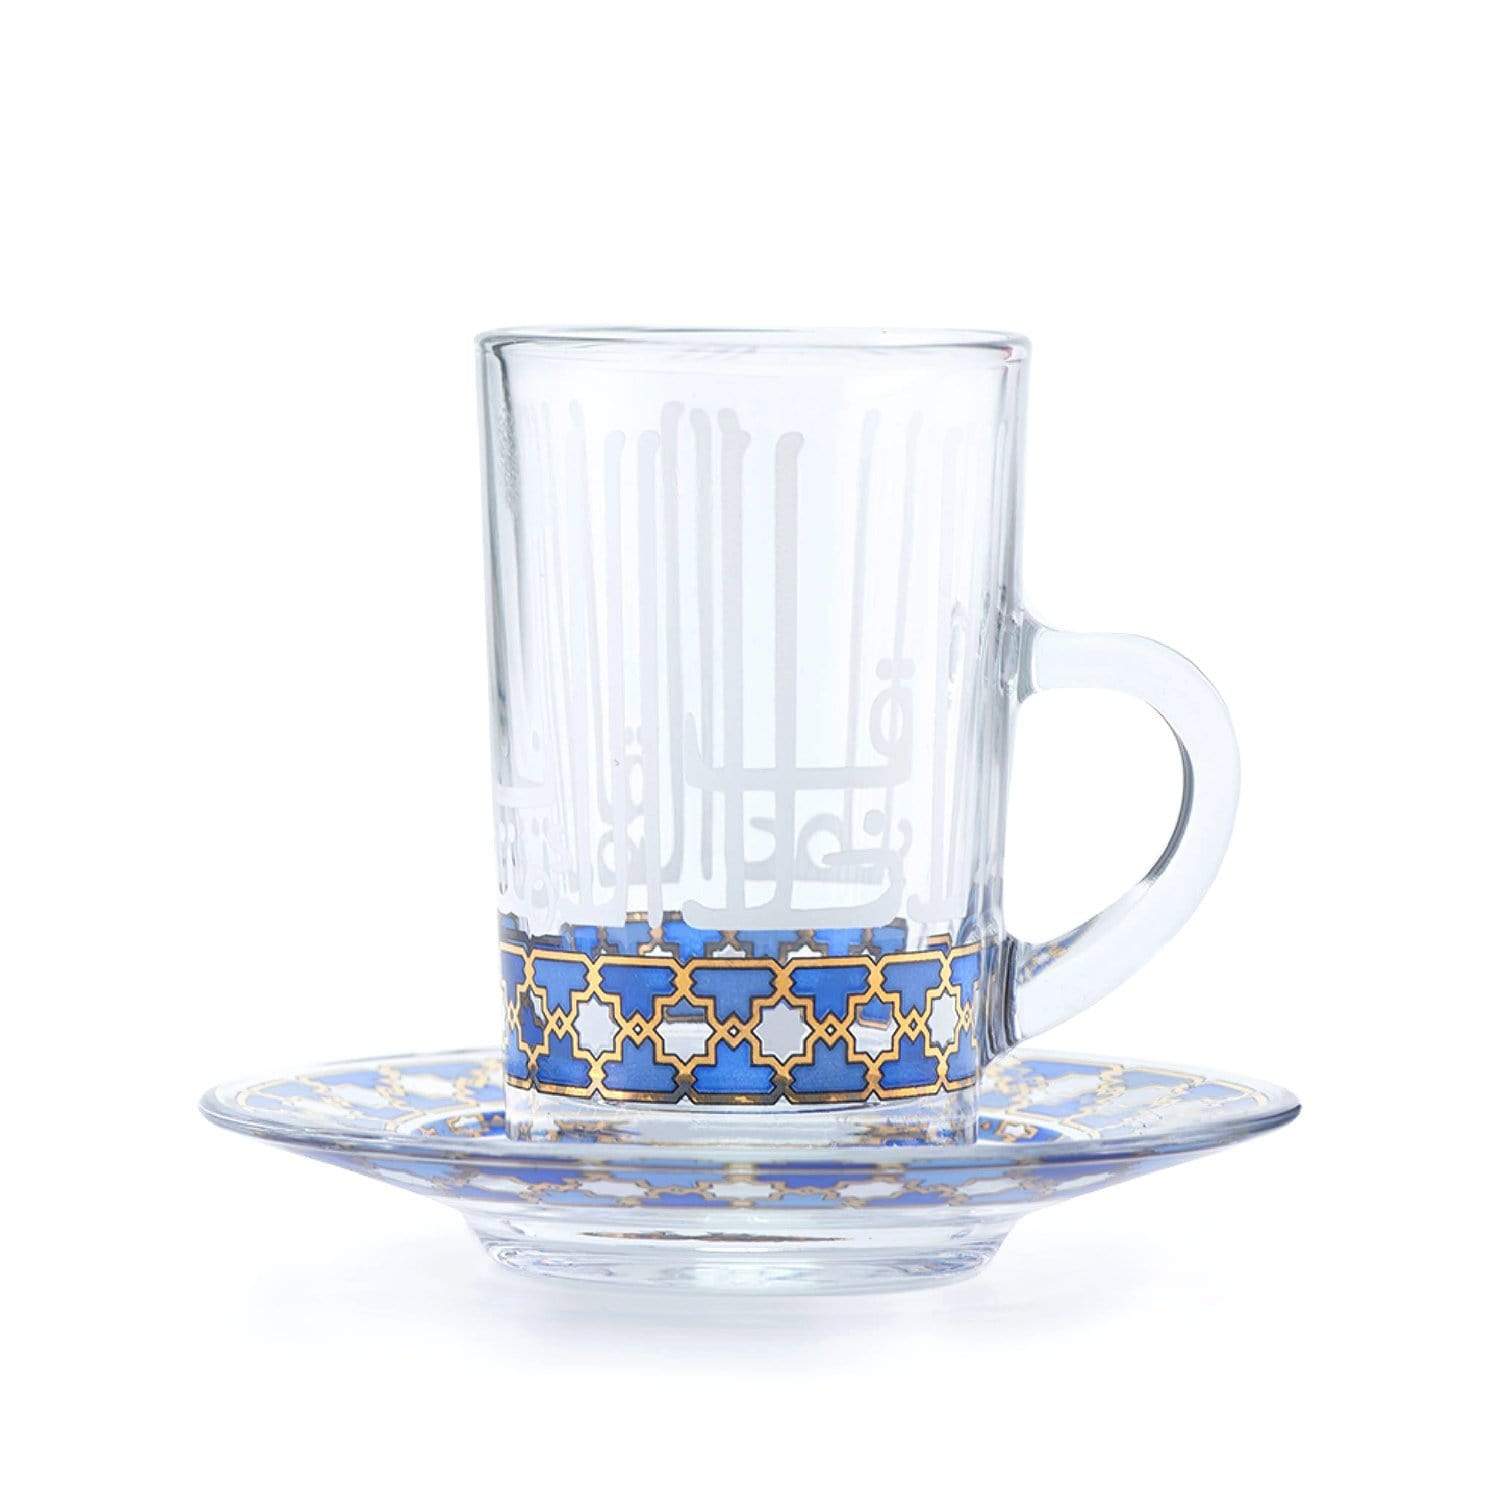 Dimlaj Asala Tea Cup and Saucer Set - Clear, Gold and Blue, 12 Pieces - 46676 - Jashanmal Home